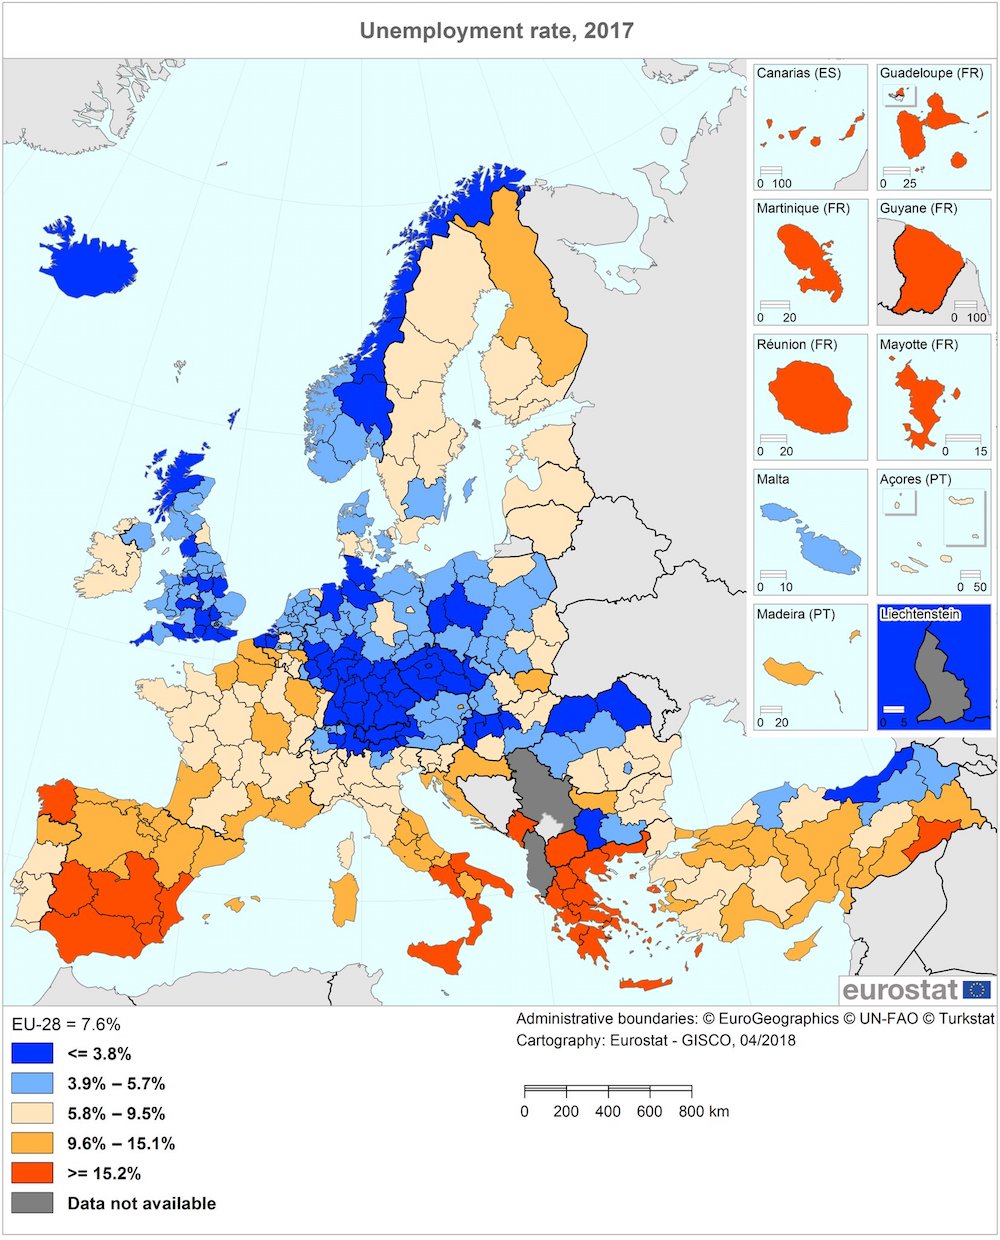 Map of the EU showing the 2017 unemployment rates.